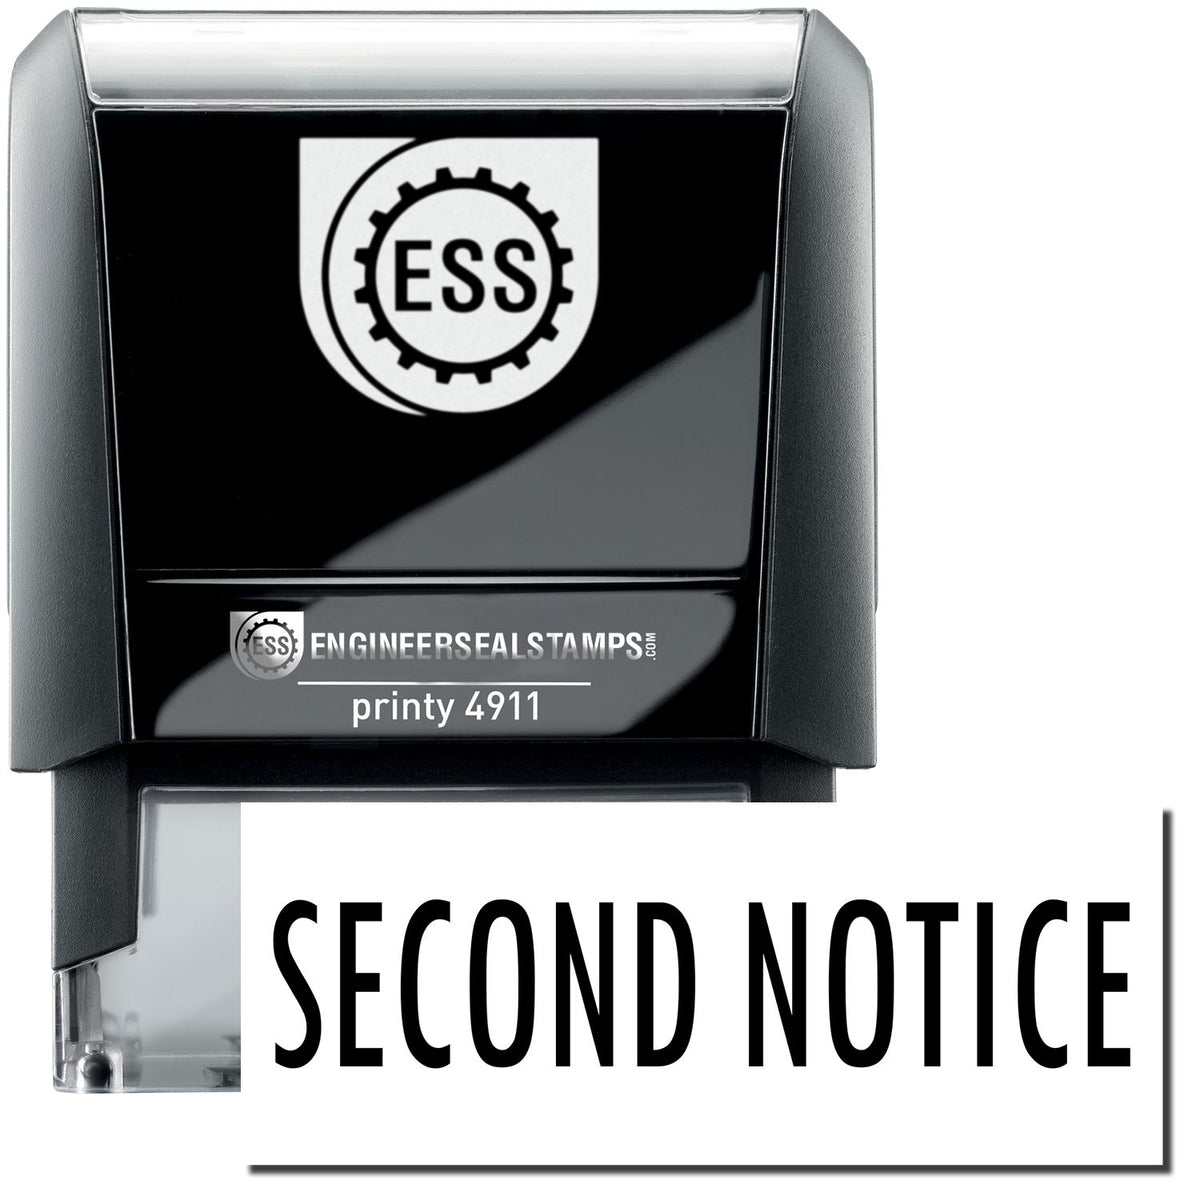 A self-inking stamp with a stamped image showing how the text &quot;SECOND NOTICE&quot; is displayed after stamping.